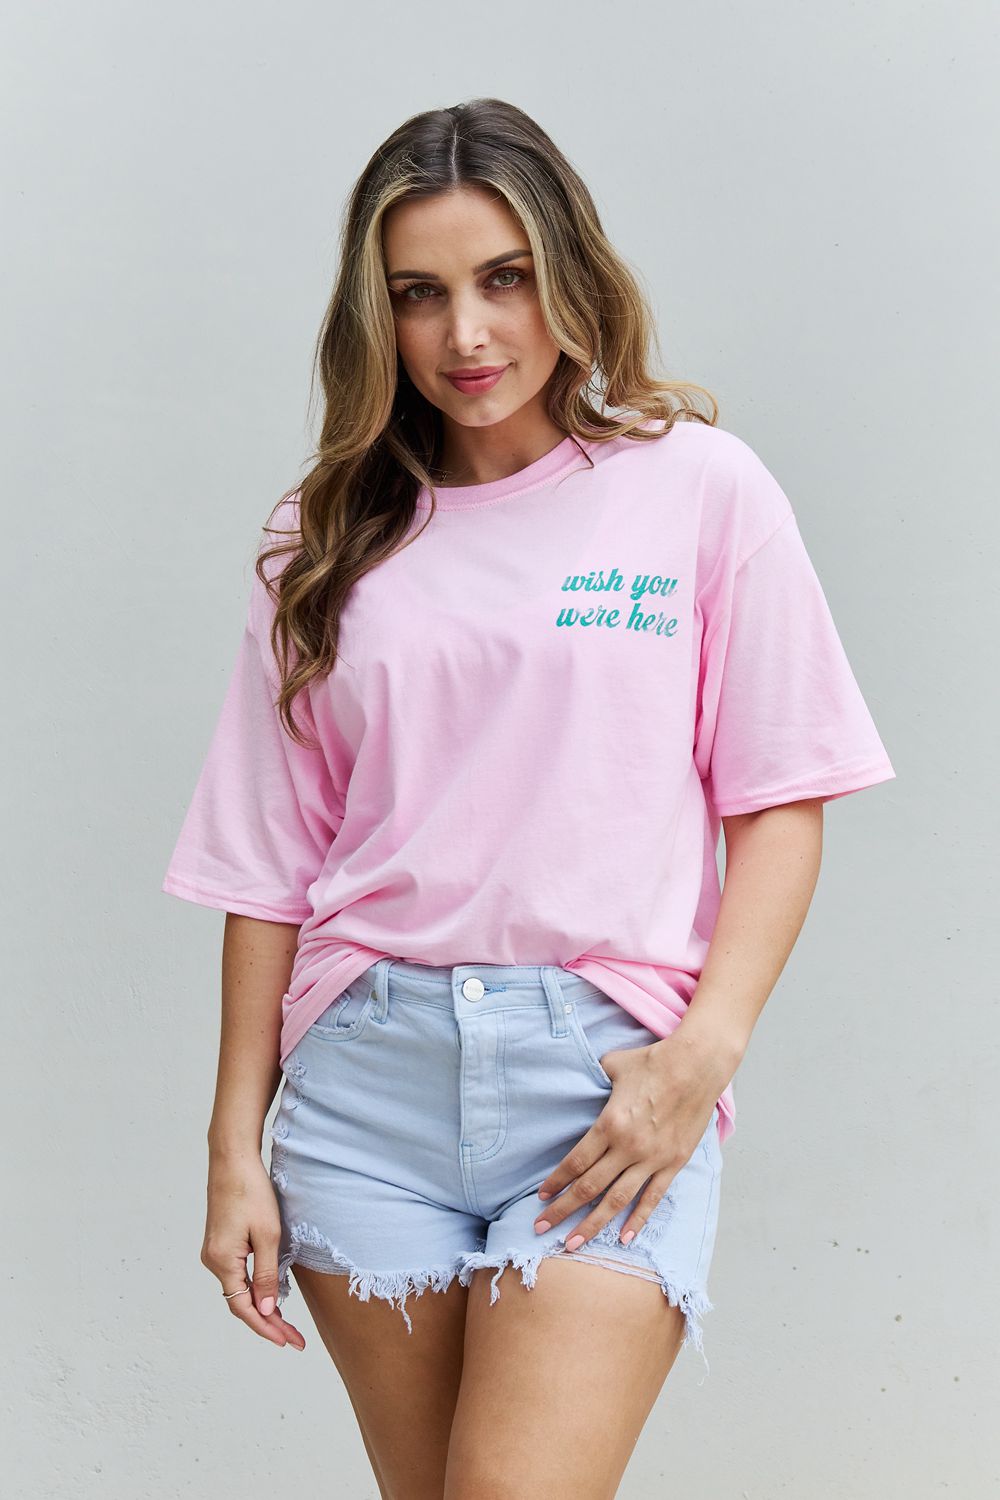 ’Wish You Were Here’ Oversized Graphic T-Shirt - Pink / S/M - T-Shirts - Shirts & Tops - 1 - 2024